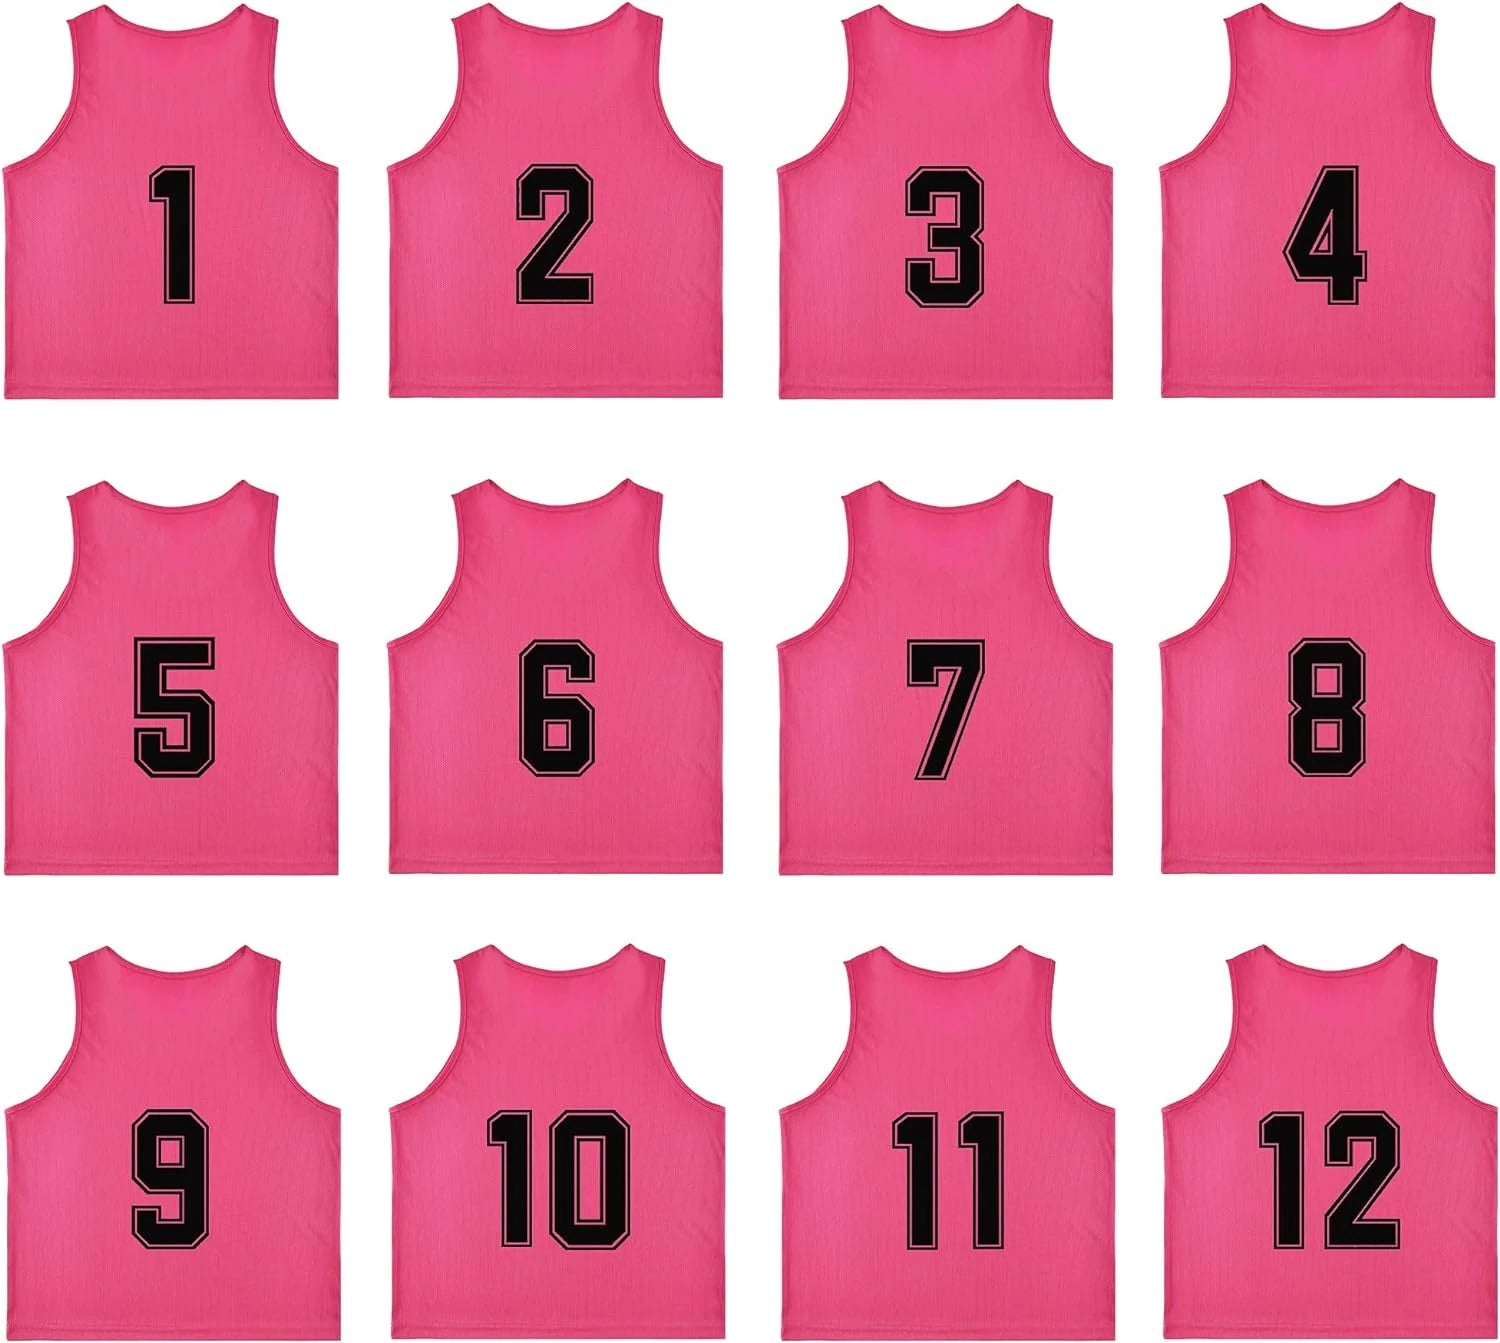 Comprar pink Tych3L 12 Pack of Numbered Jersey Bibs Scrimmage Training Vests for all sizes.